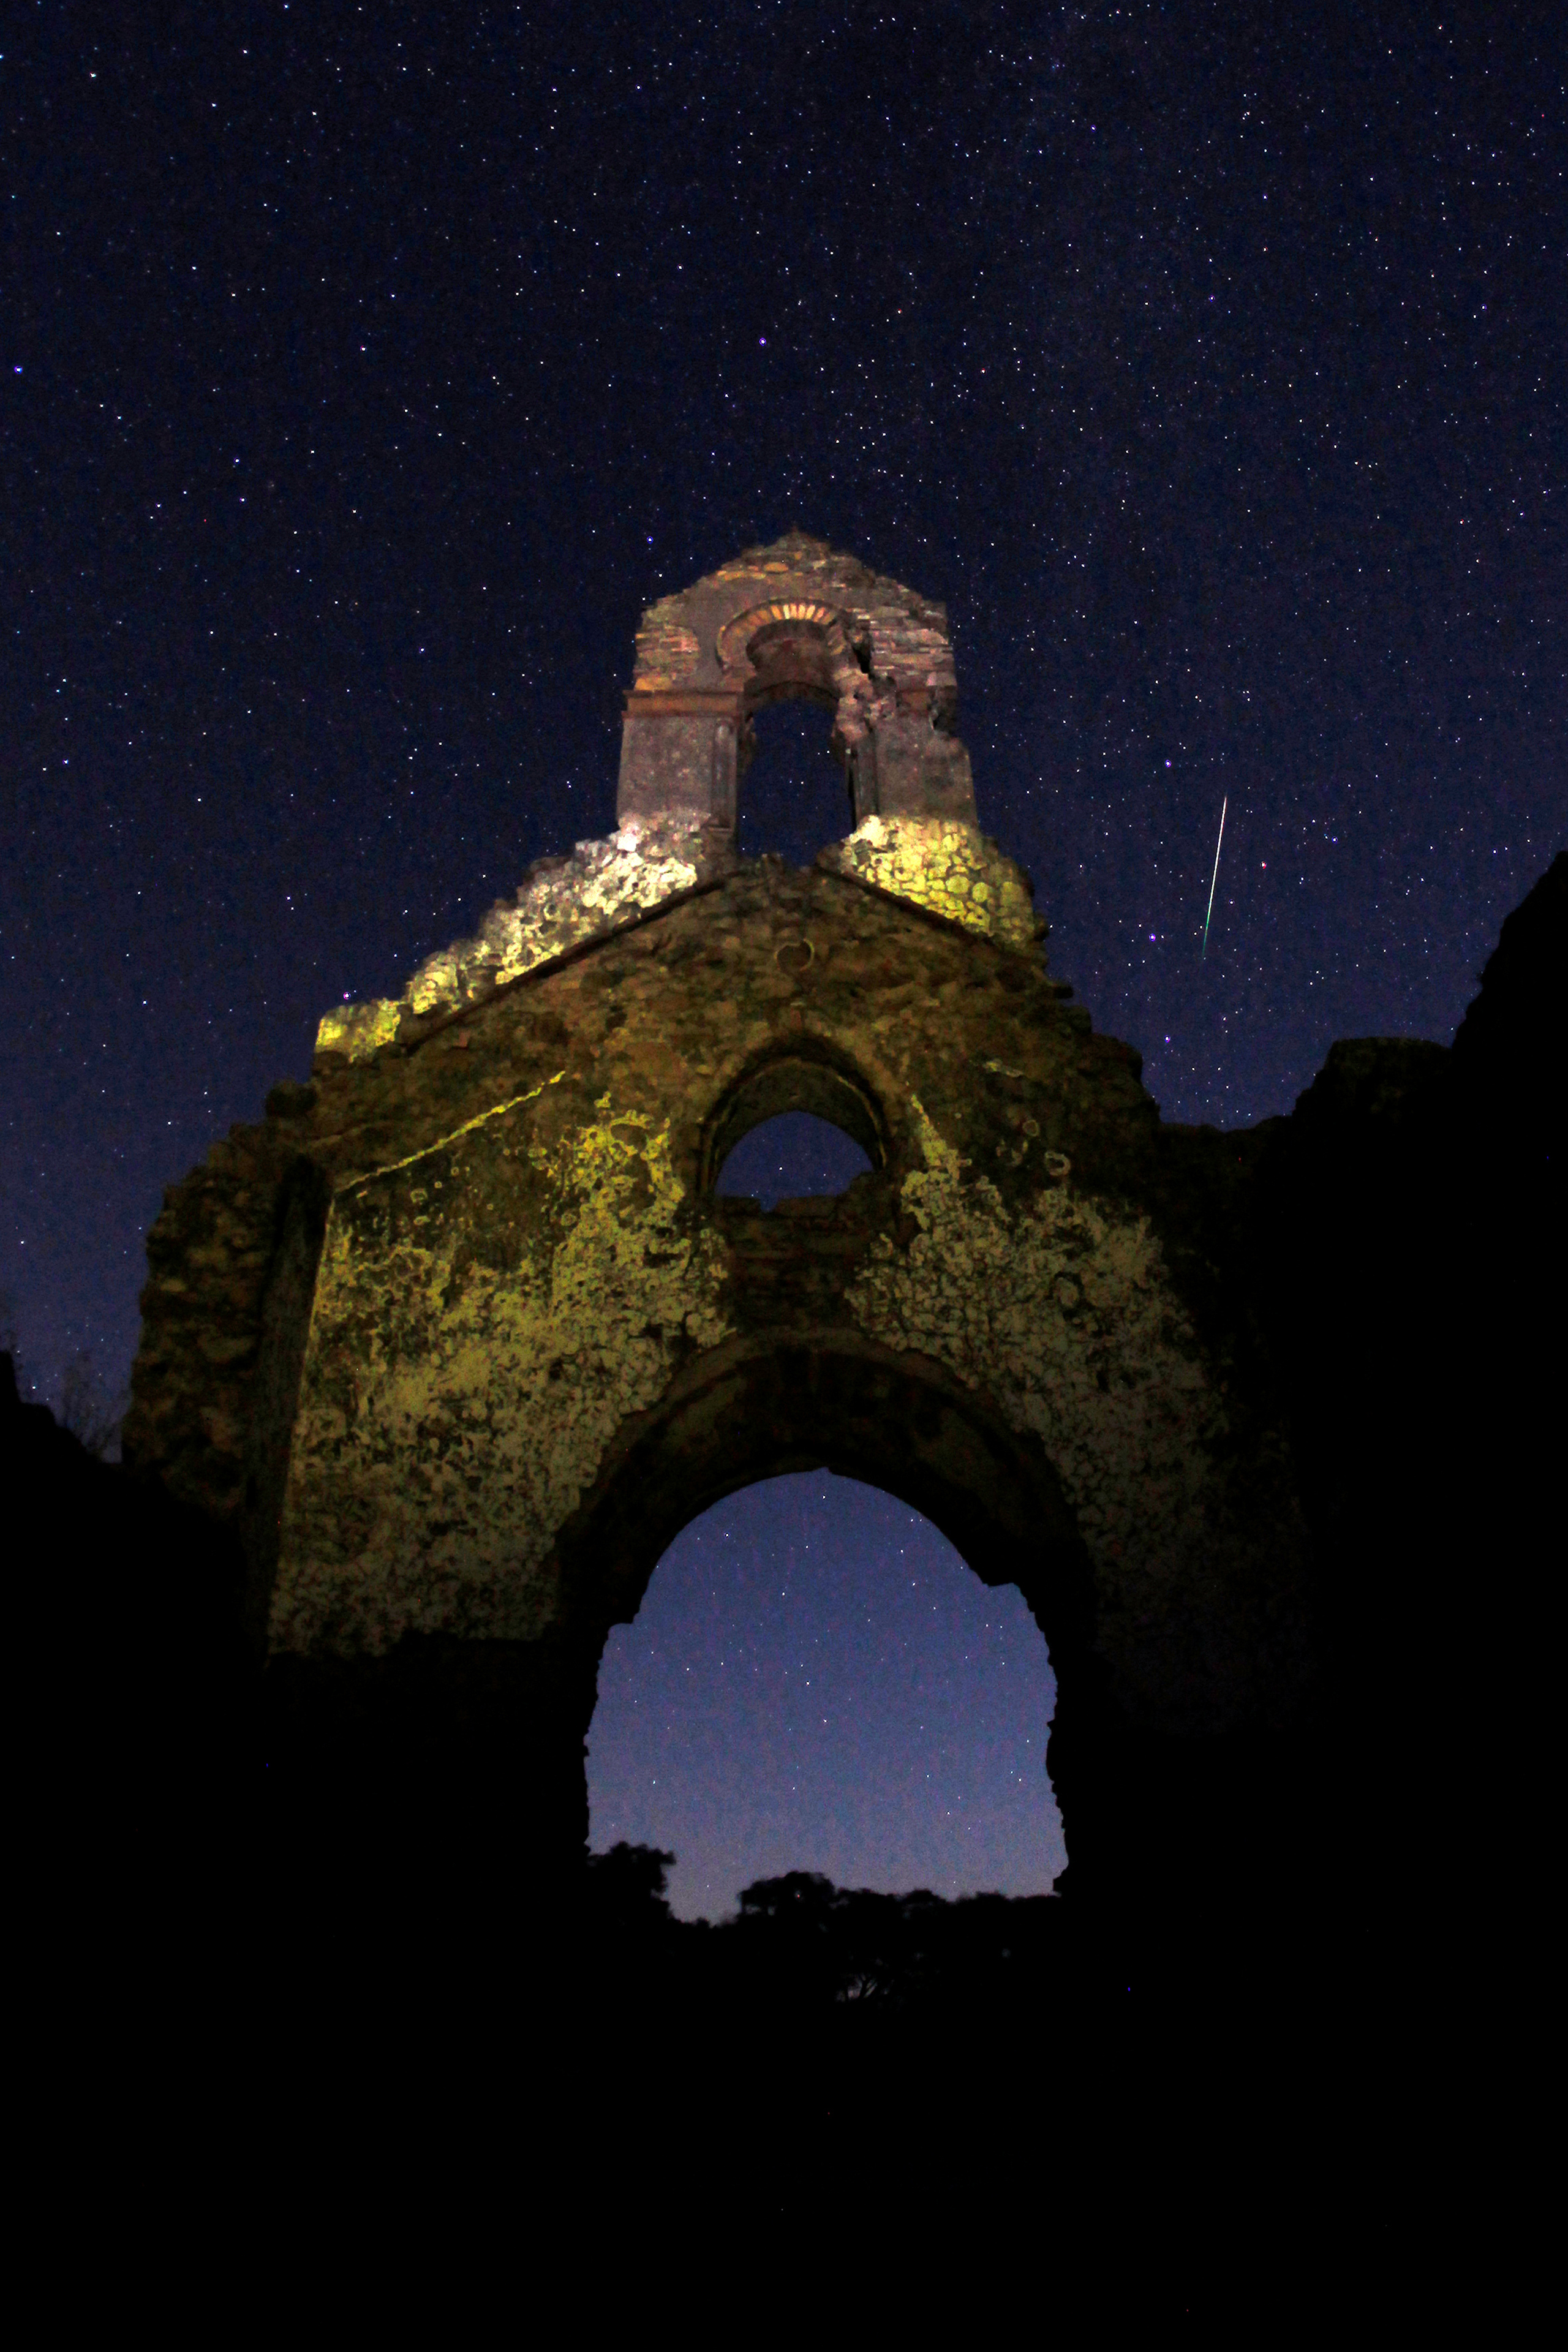 A meteor streaks past stars in the night sky above the ruins of a church in the Los Alcornocales (cork oak forests) nature park, during the Perseid meteor shower in the ancient village of La Sauceda, near Cortes de la Frontera, southern Spain, in the early morning of Aug. 12, 2016.